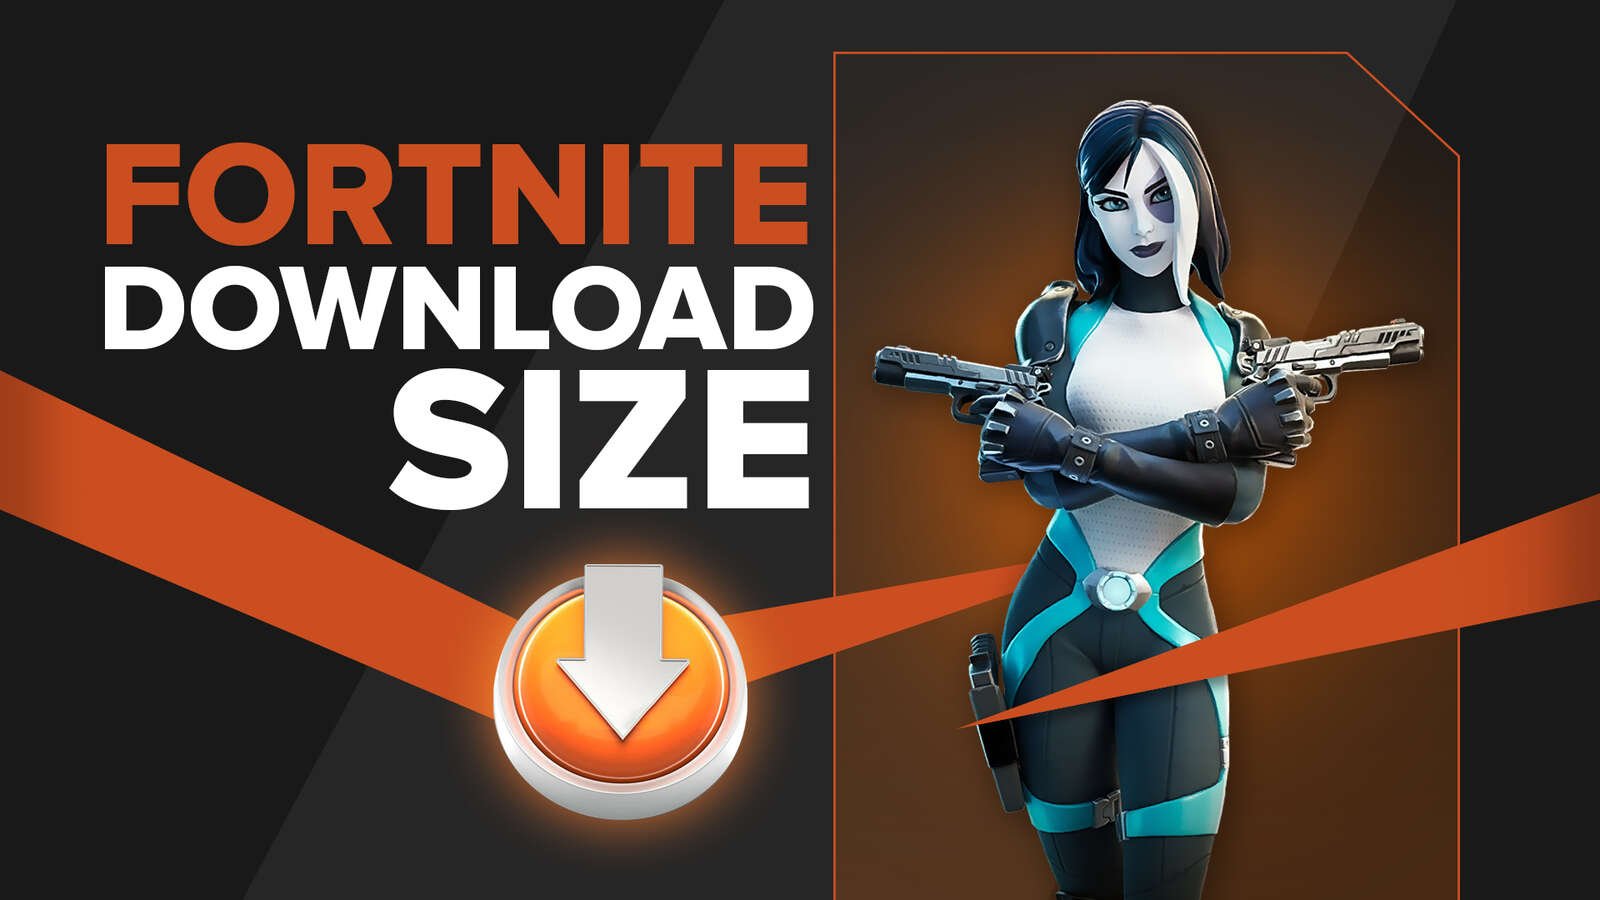 What Is The Current Fortnite Download Size? [All Platforms]